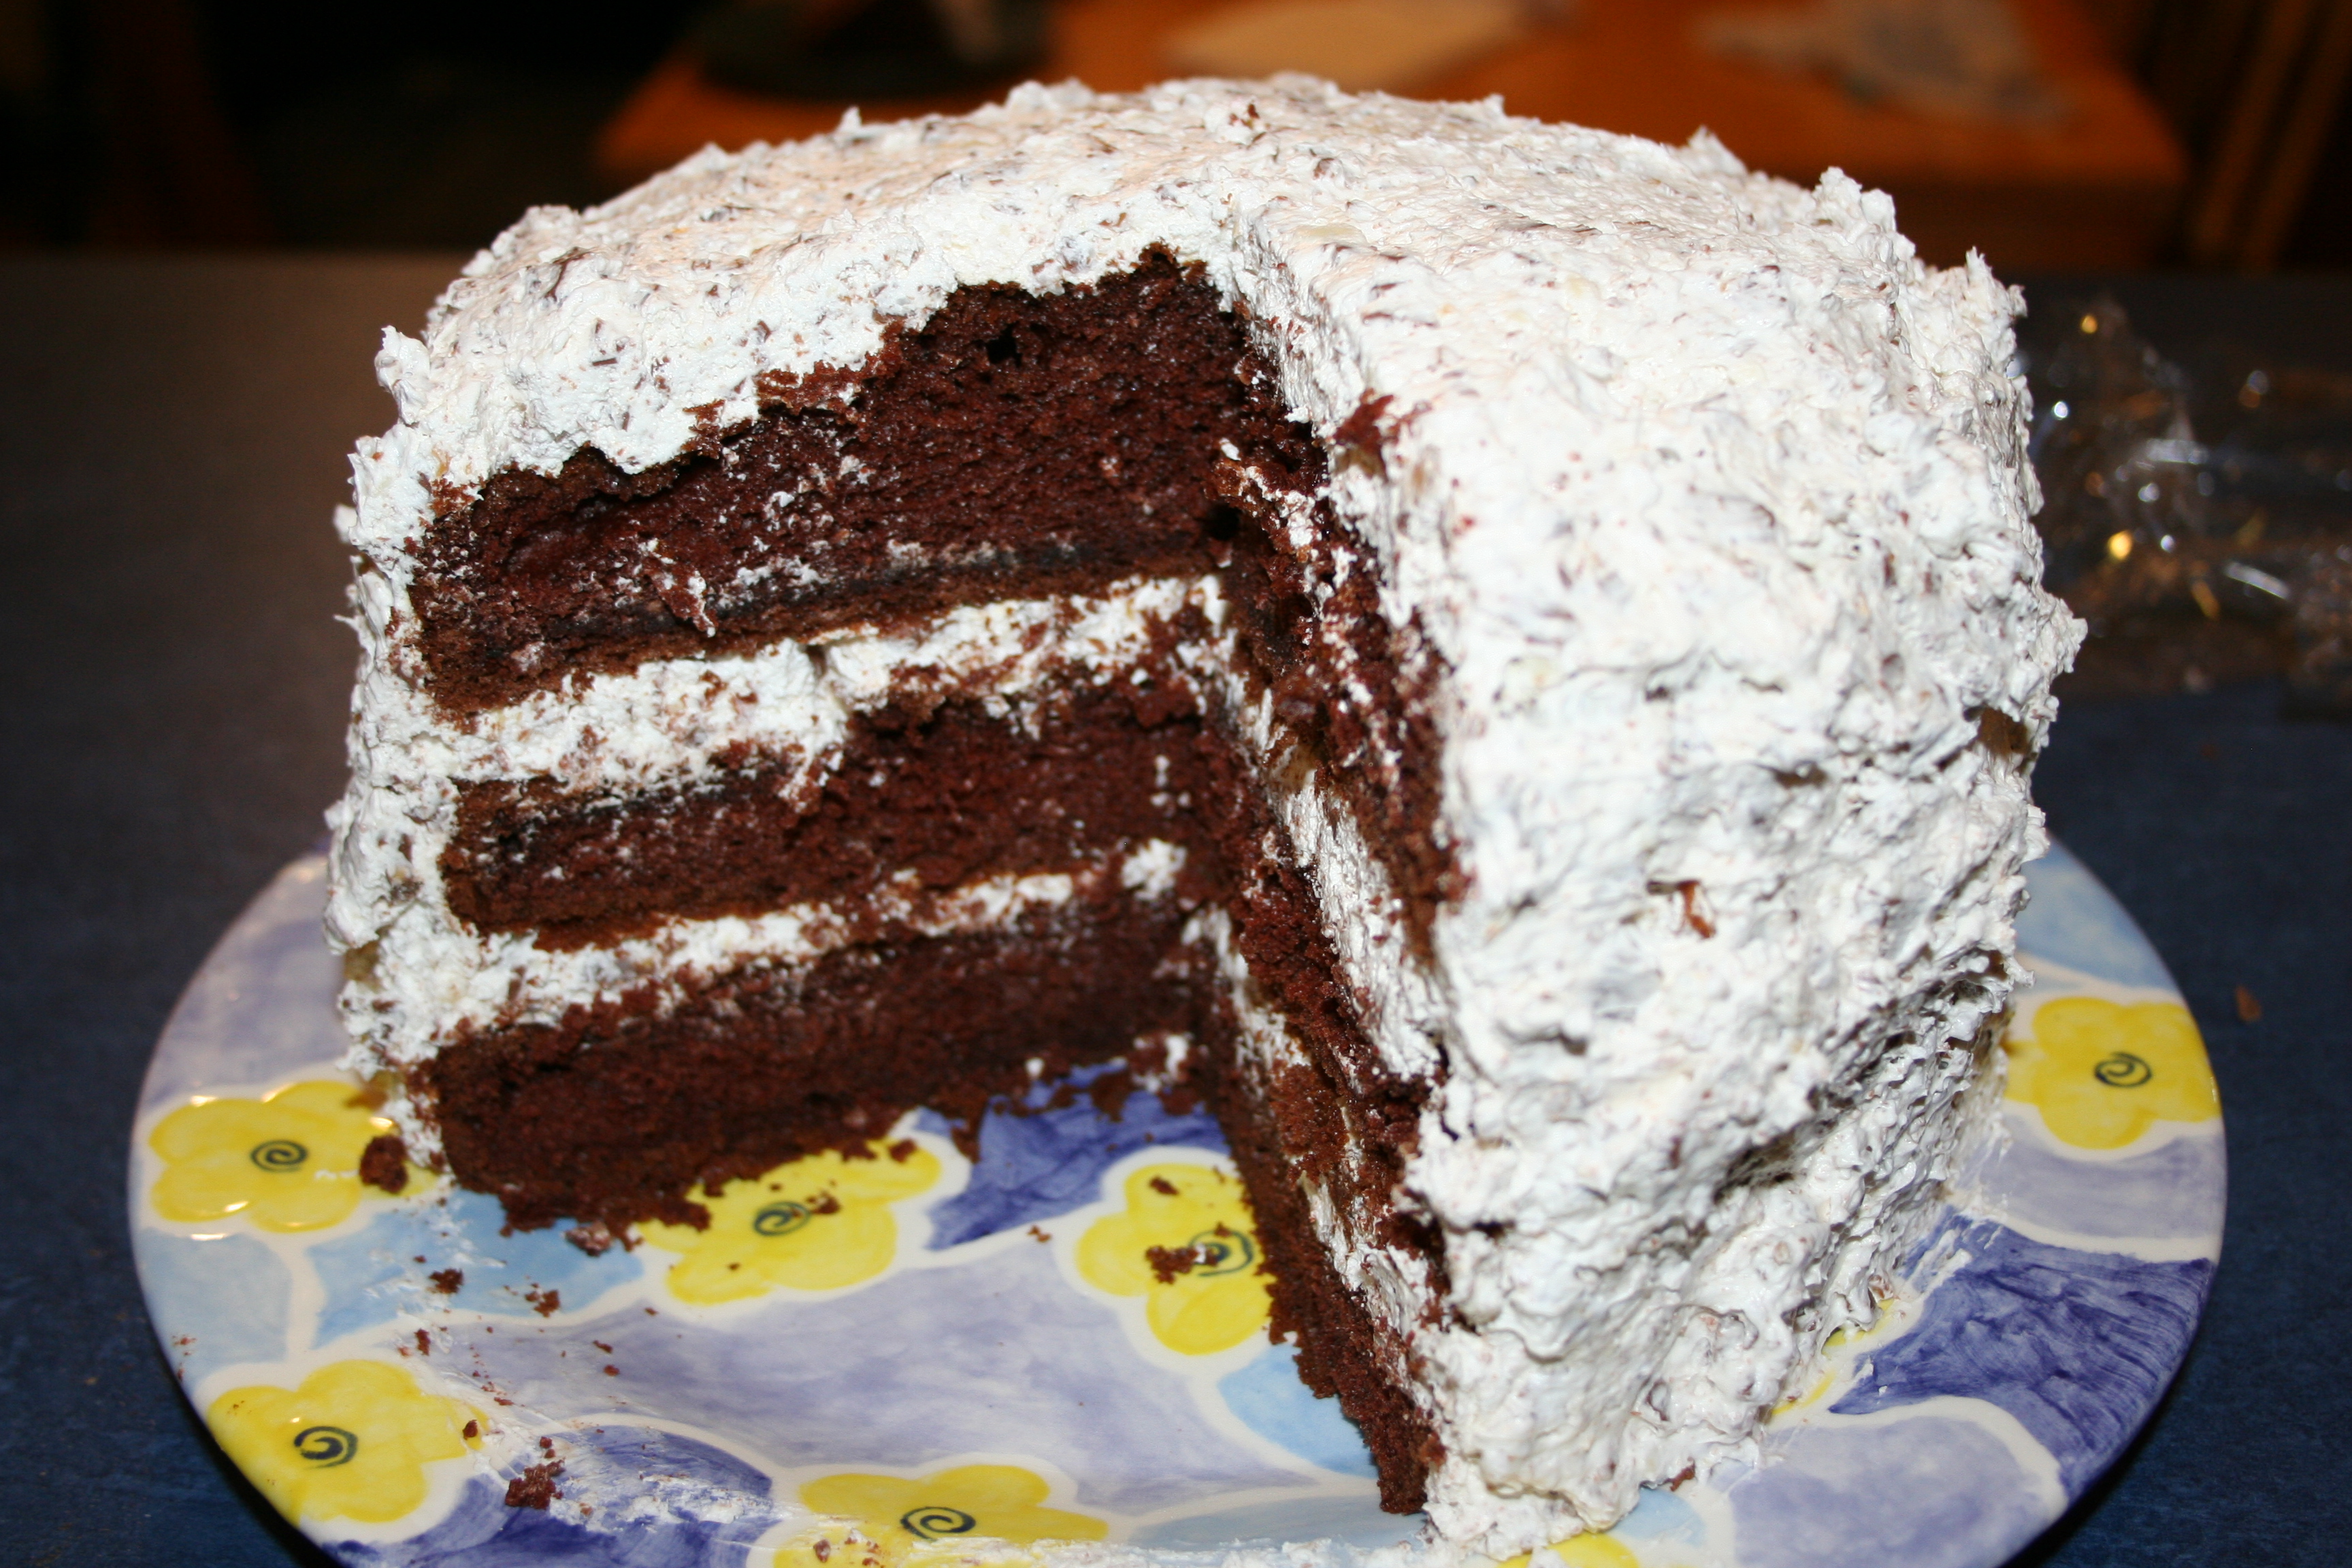 Hershey's Perfectly Chocolate Cake with Fluffy White Icing - Savoring Italy